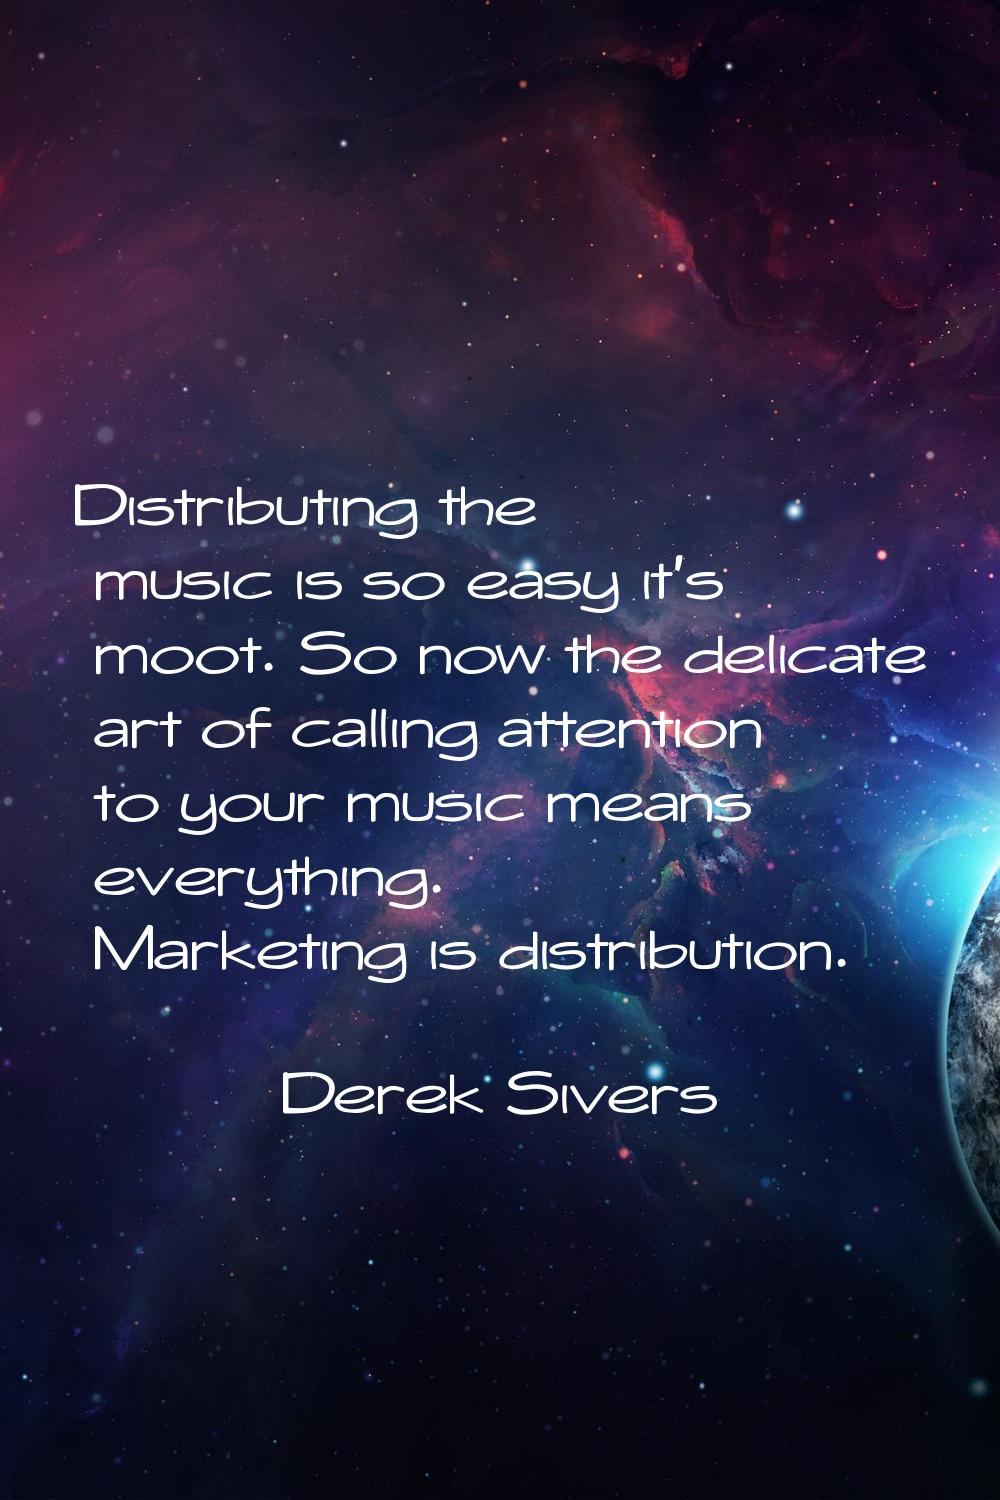 Distributing the music is so easy it's moot. So now the delicate art of calling attention to your m